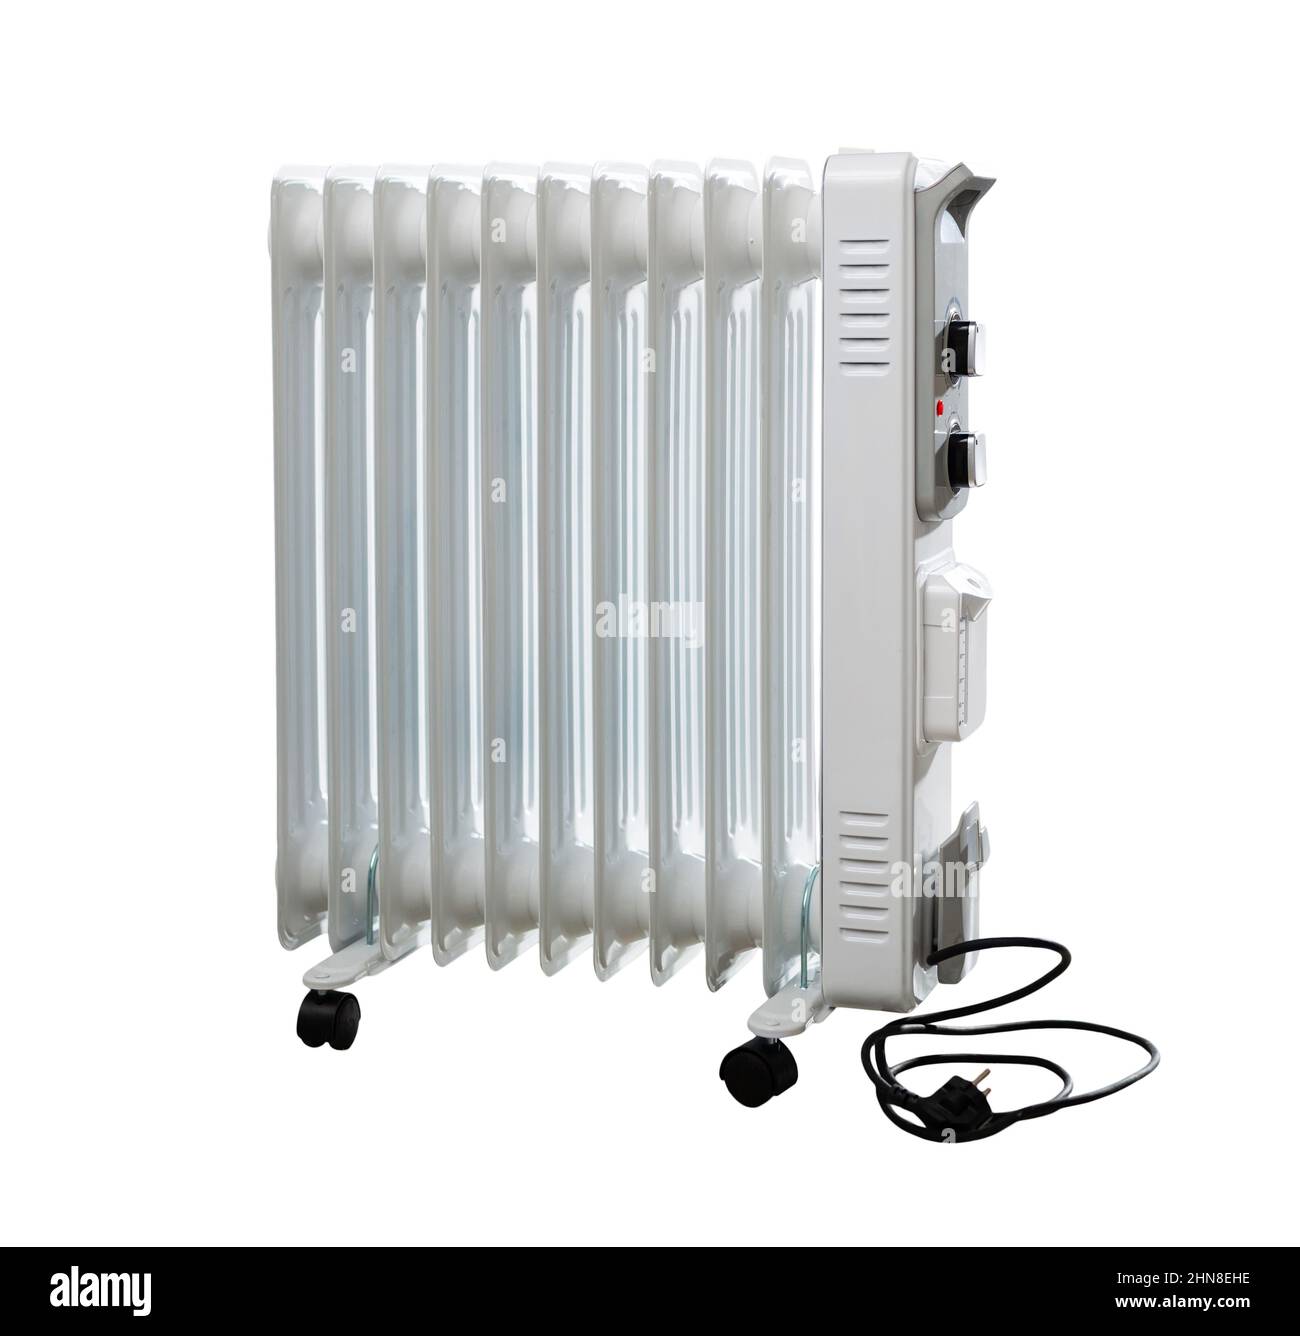 Electric oil heater Stock Photo